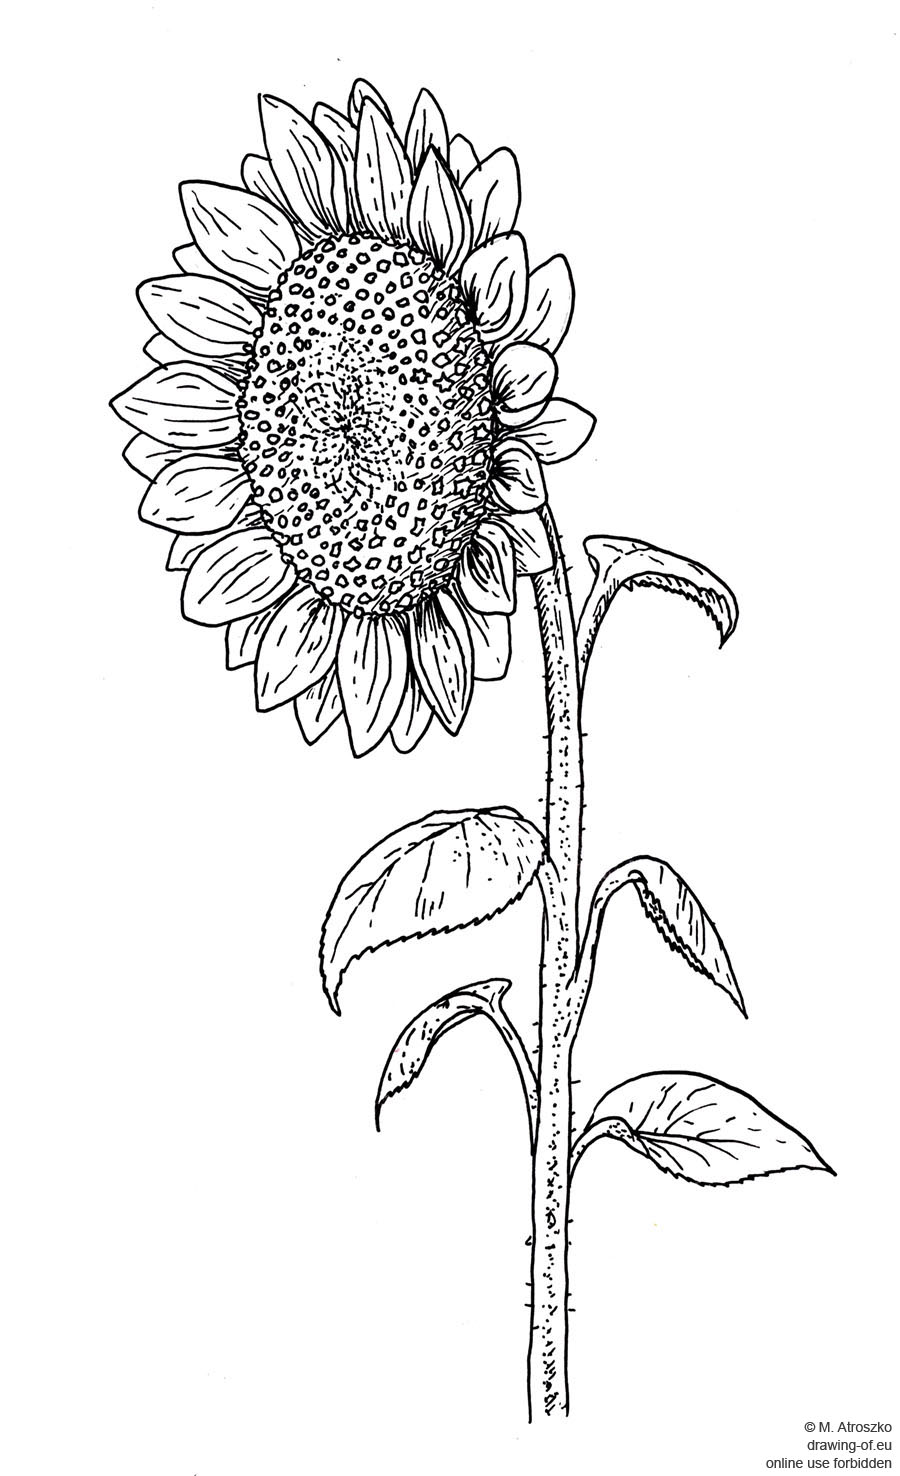 drawing of sunflower